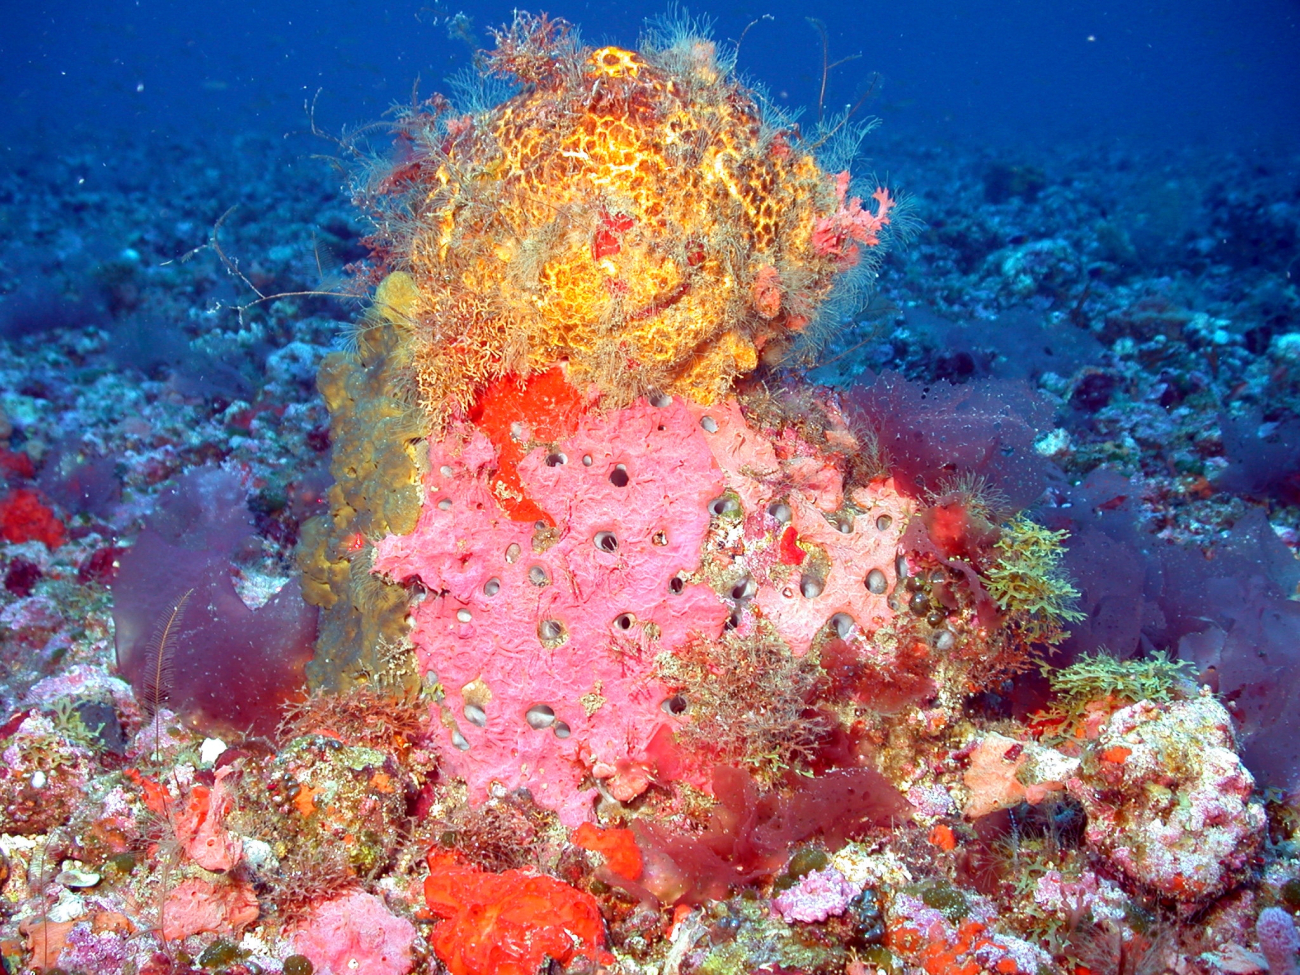 Yellow and red sponge with red algae around base